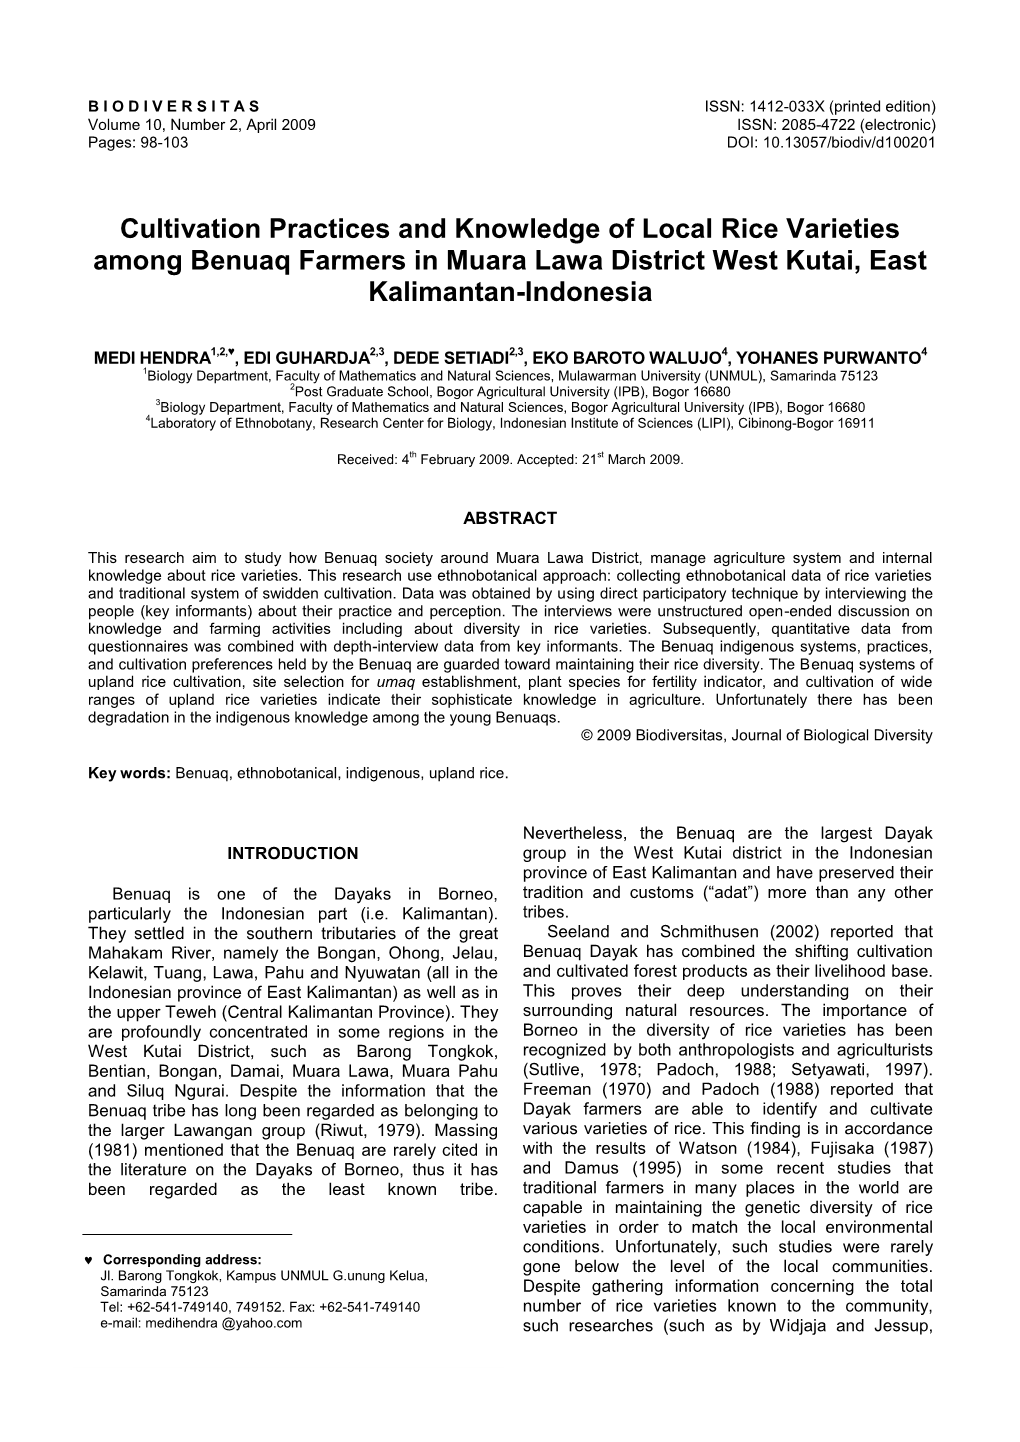 Cultivation Practices and Knowledge of Local Rice Varieties Among Benuaq Farmers in Muara Lawa District West Kutai, East Kalimantan-Indonesia